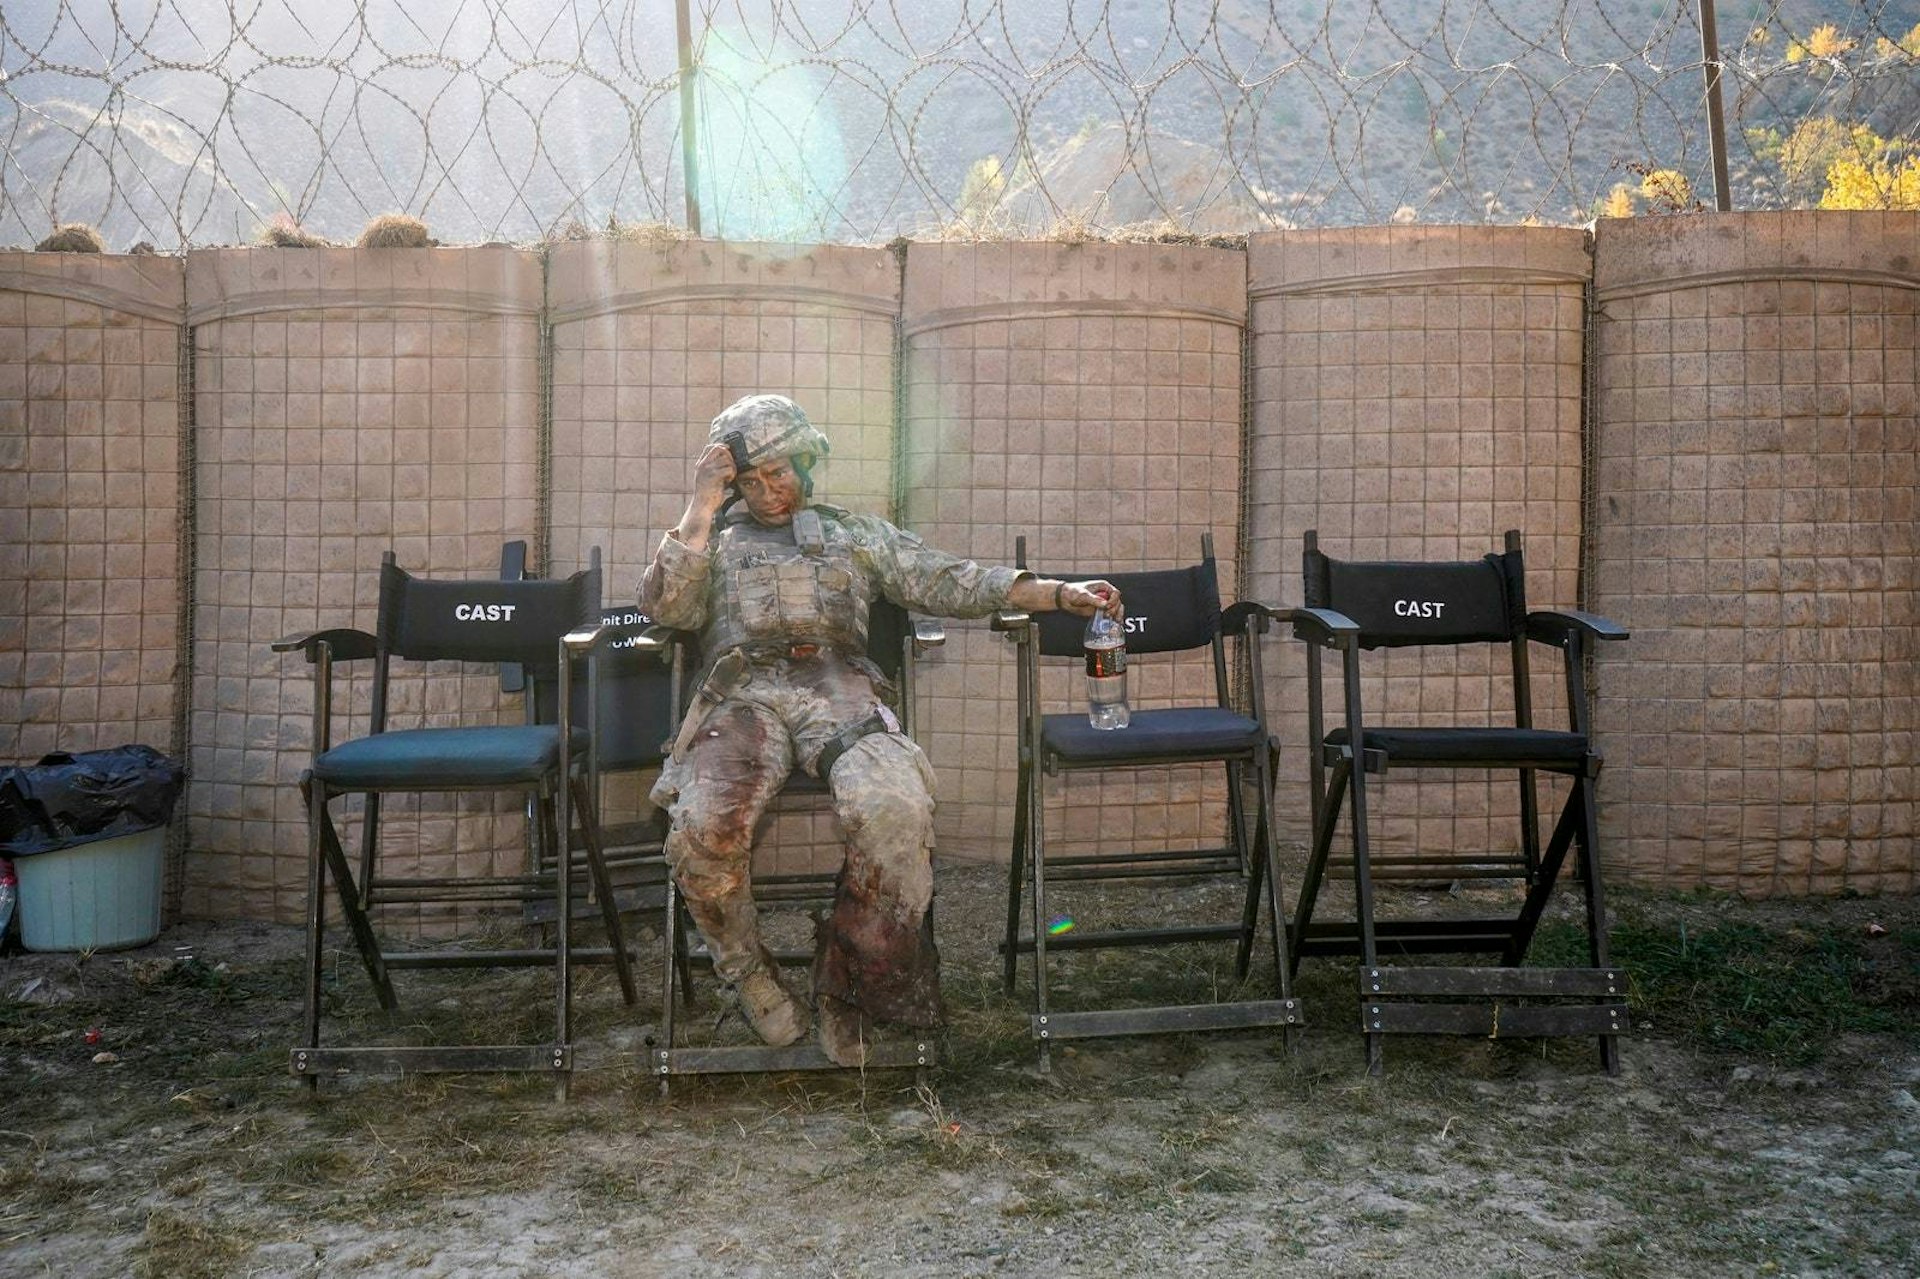 Scenes from the frontlines of America’s never-ending war